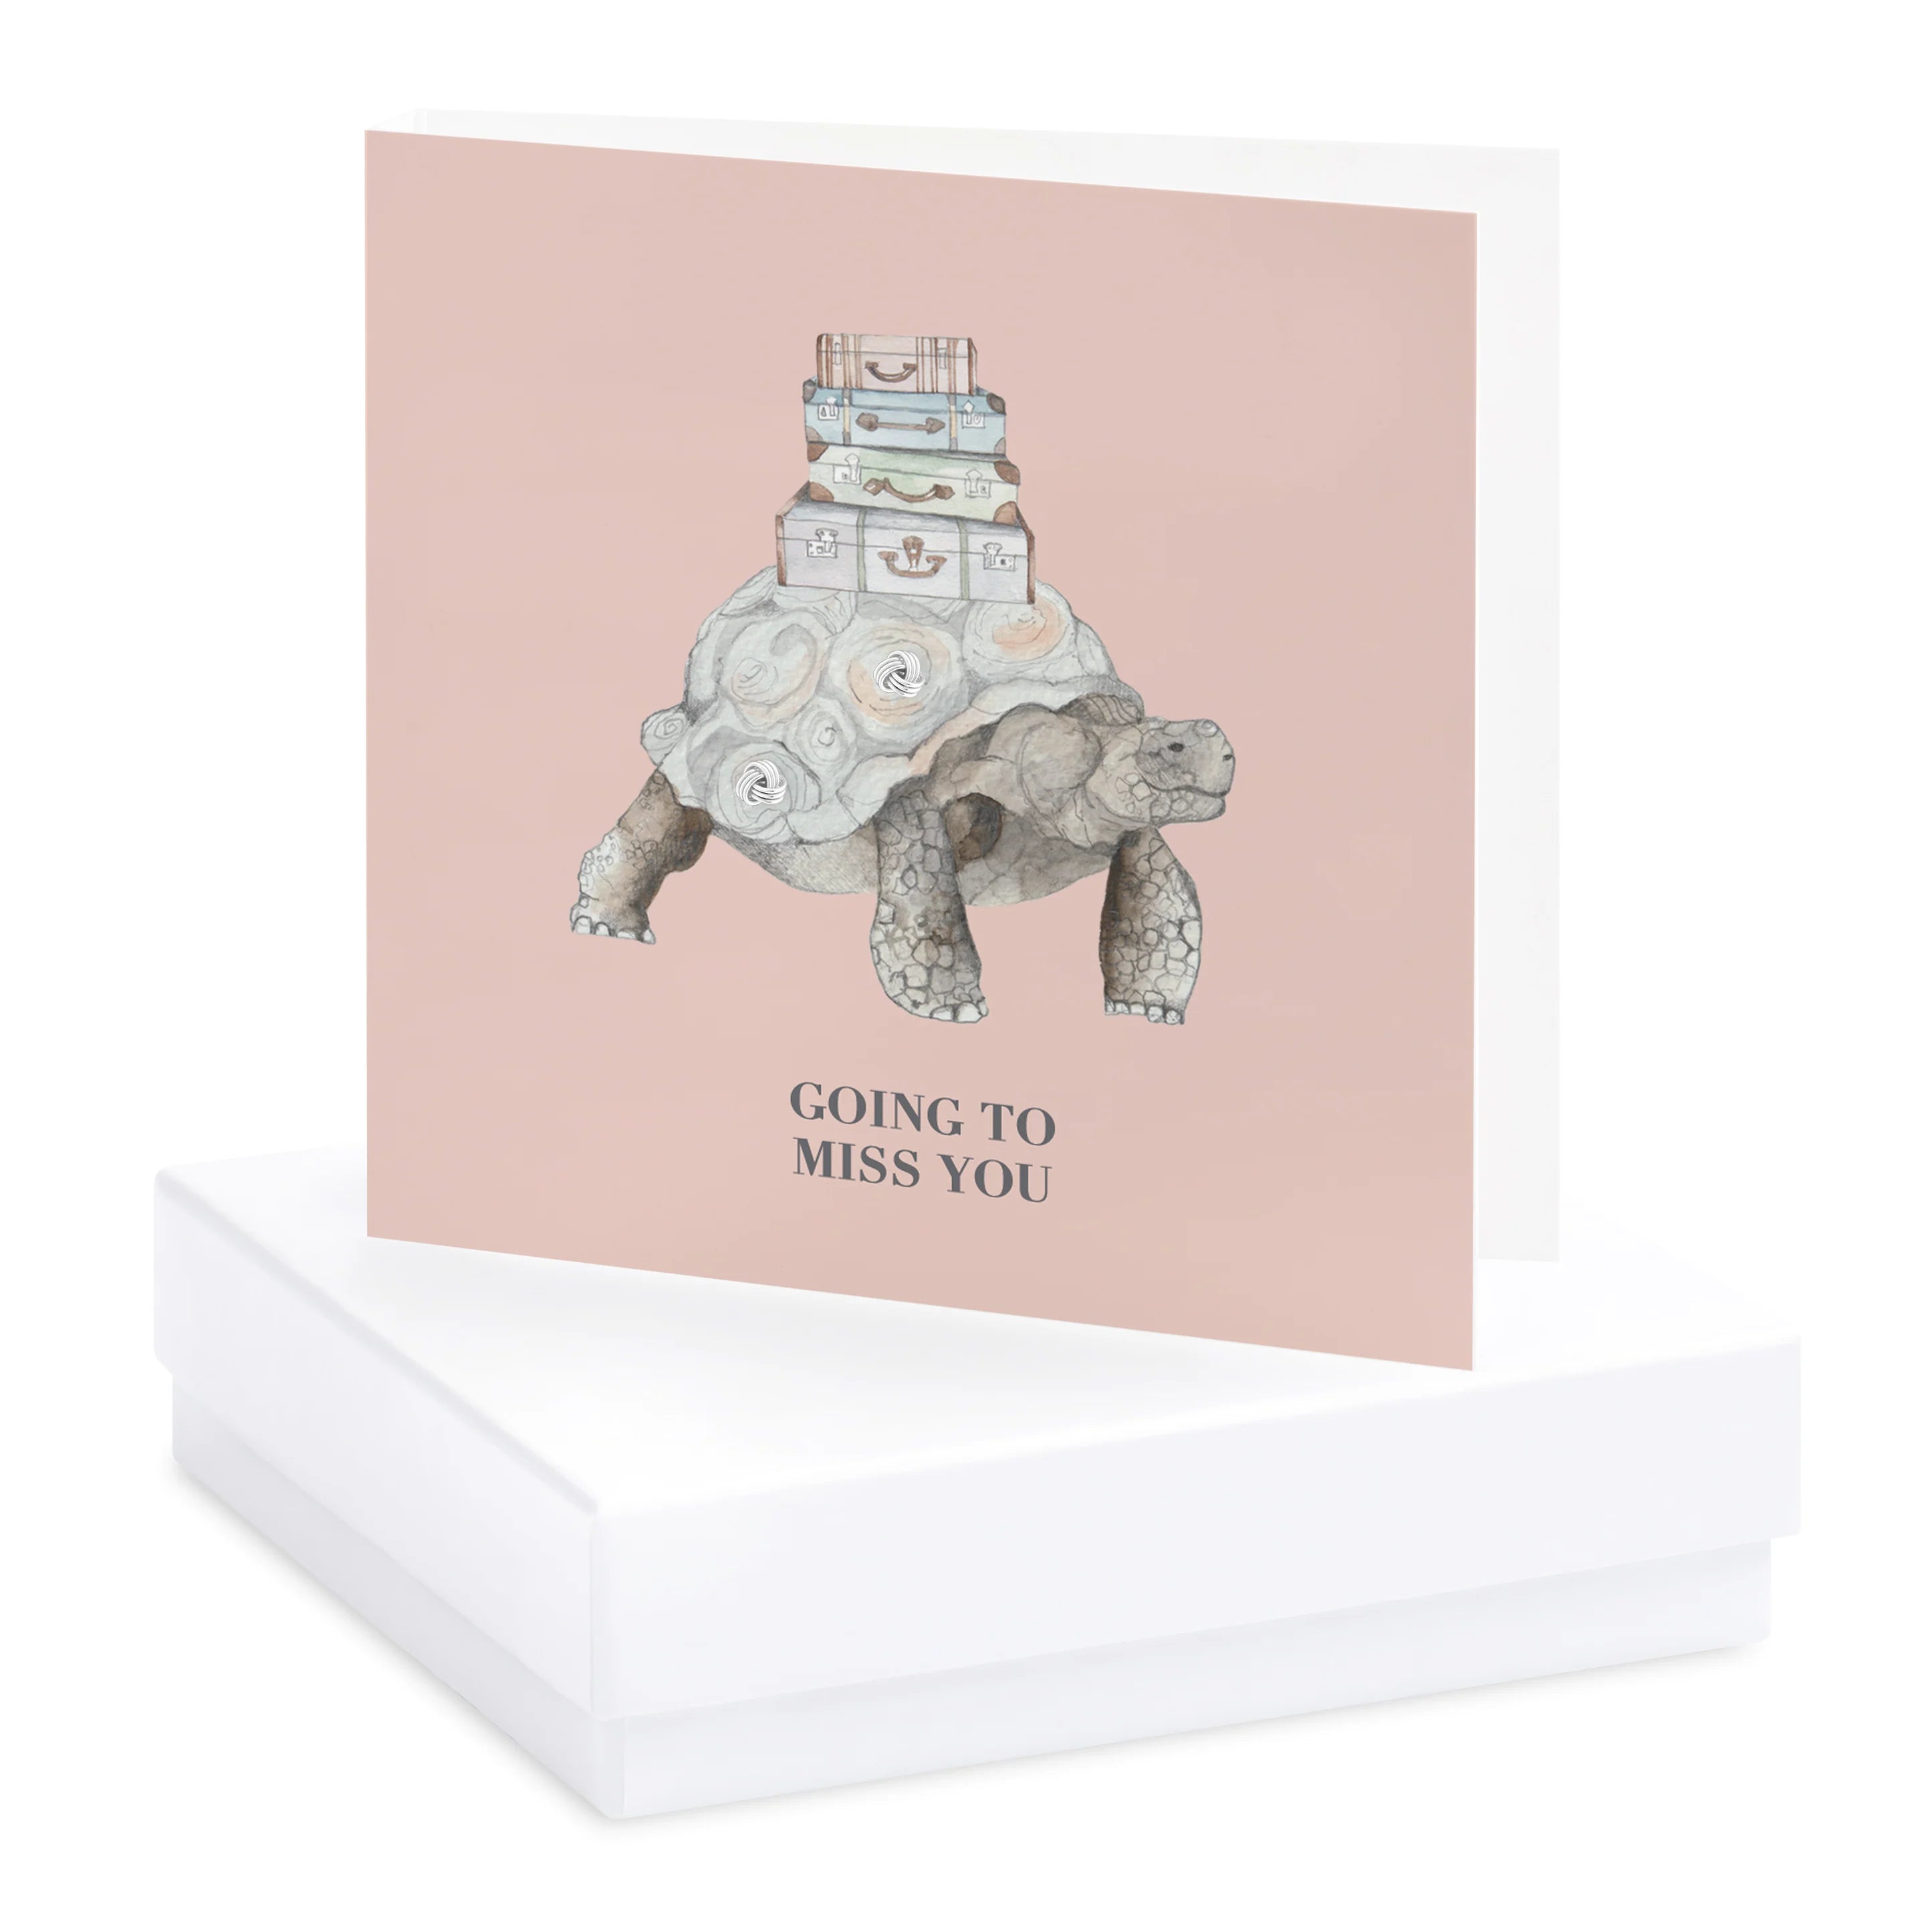 Fabulous Gifts Crumble & Core Box Tortoise Miss You Earring Card by Weirs of Baggot Street